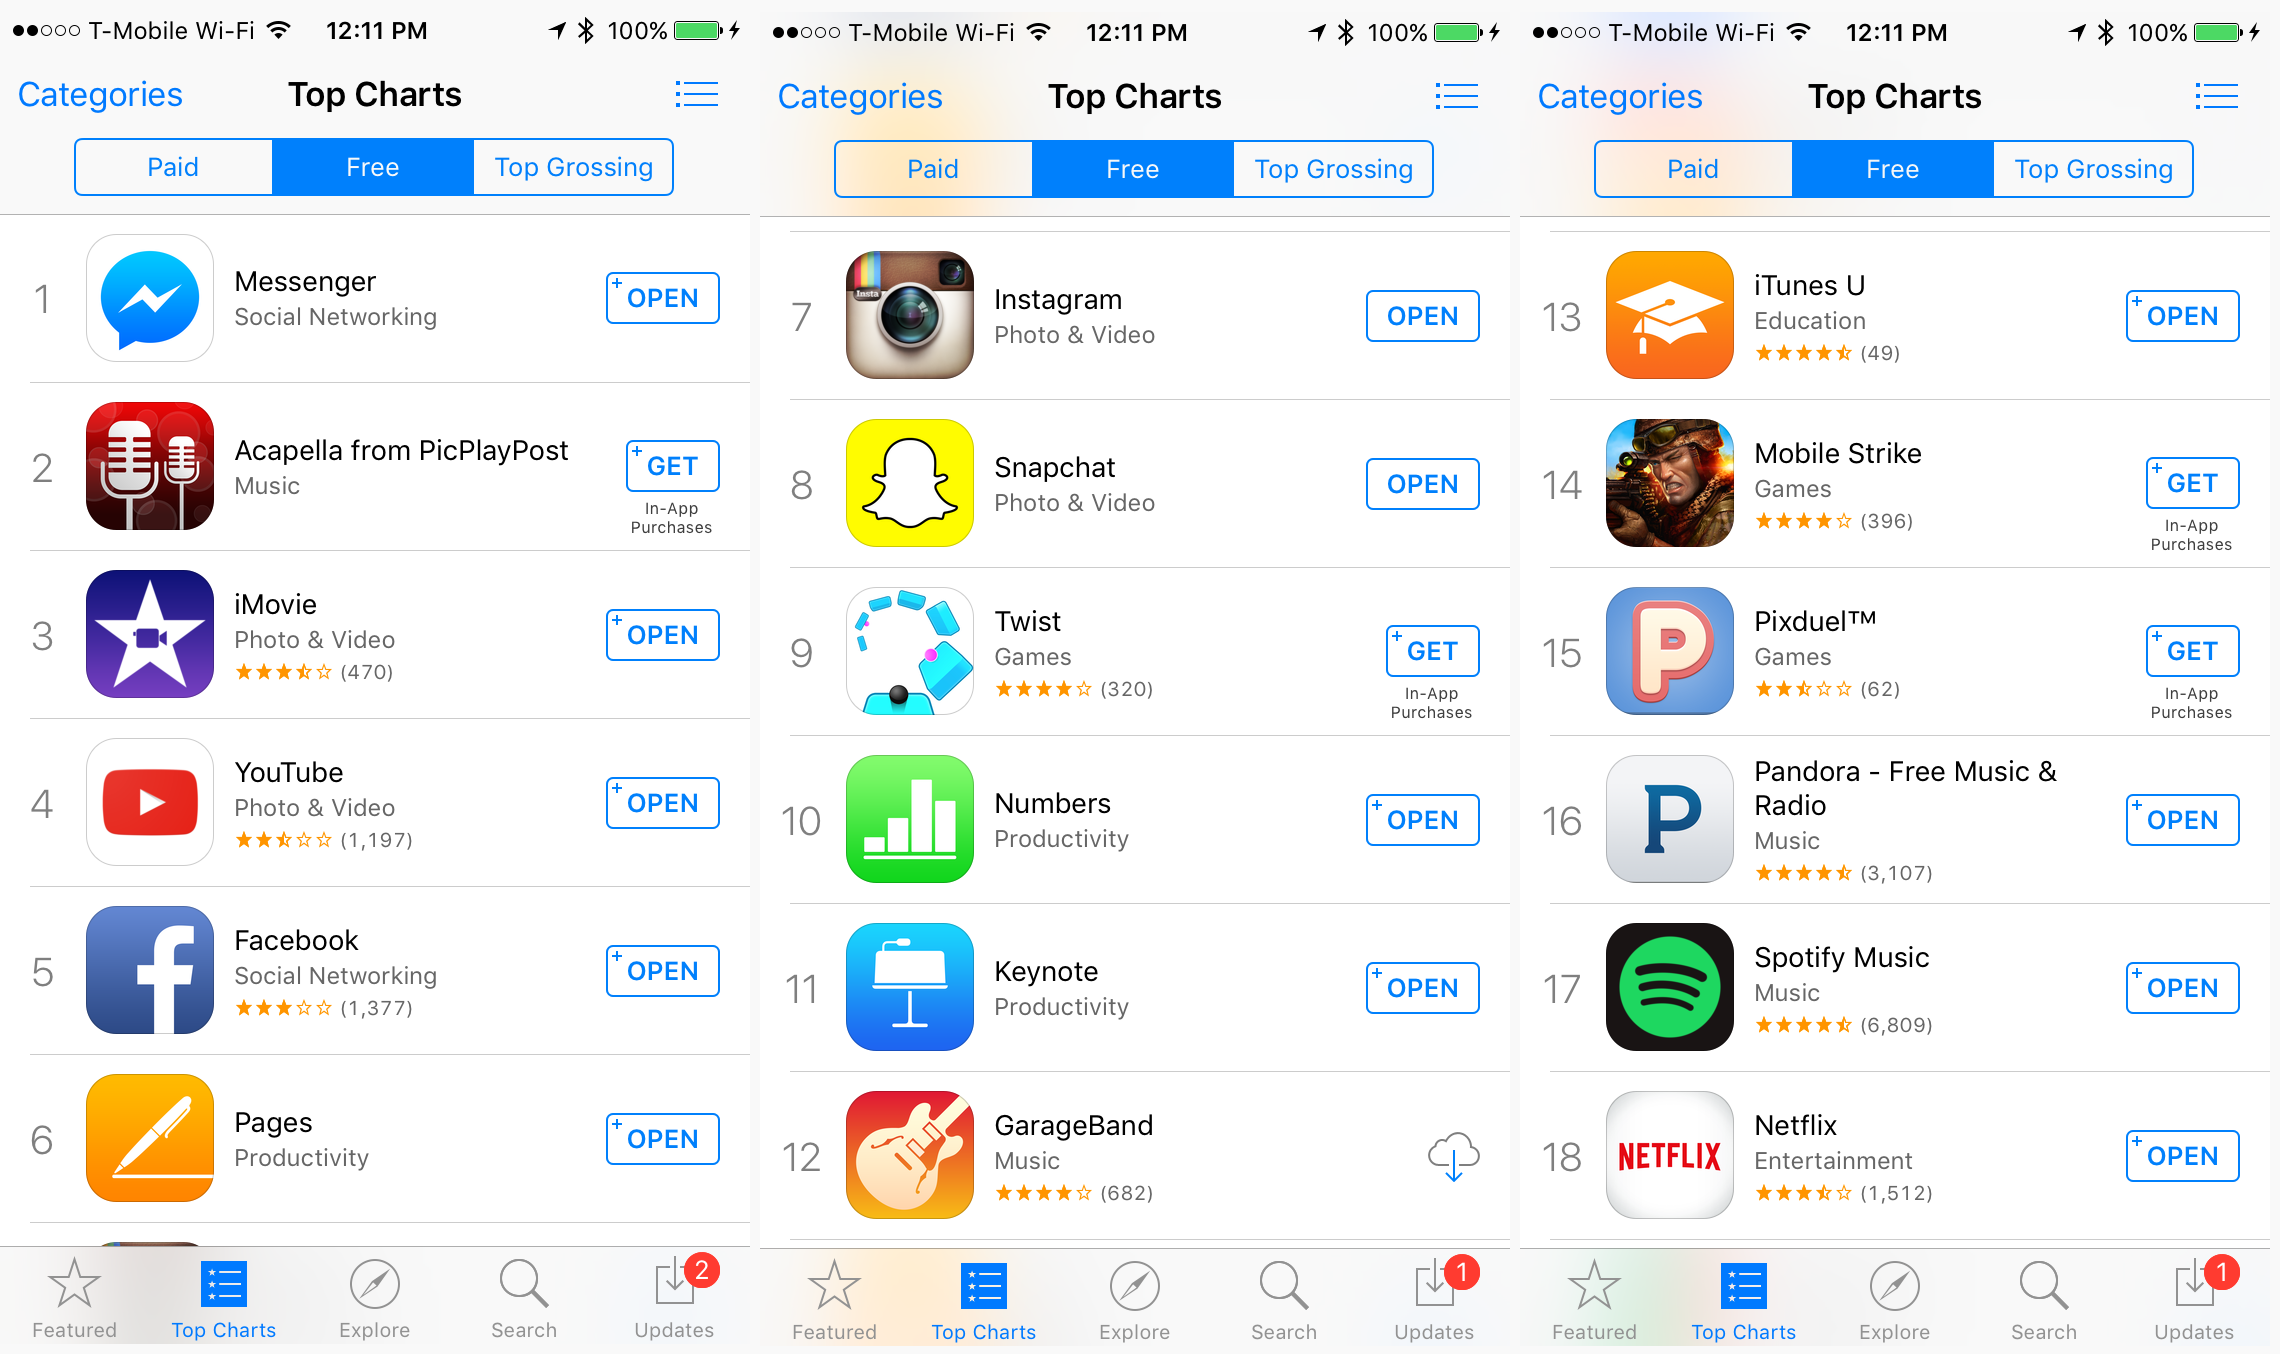 Apple Appears To Be Promoting Its Own Apps In The iPhone App Store’s Top Ch...